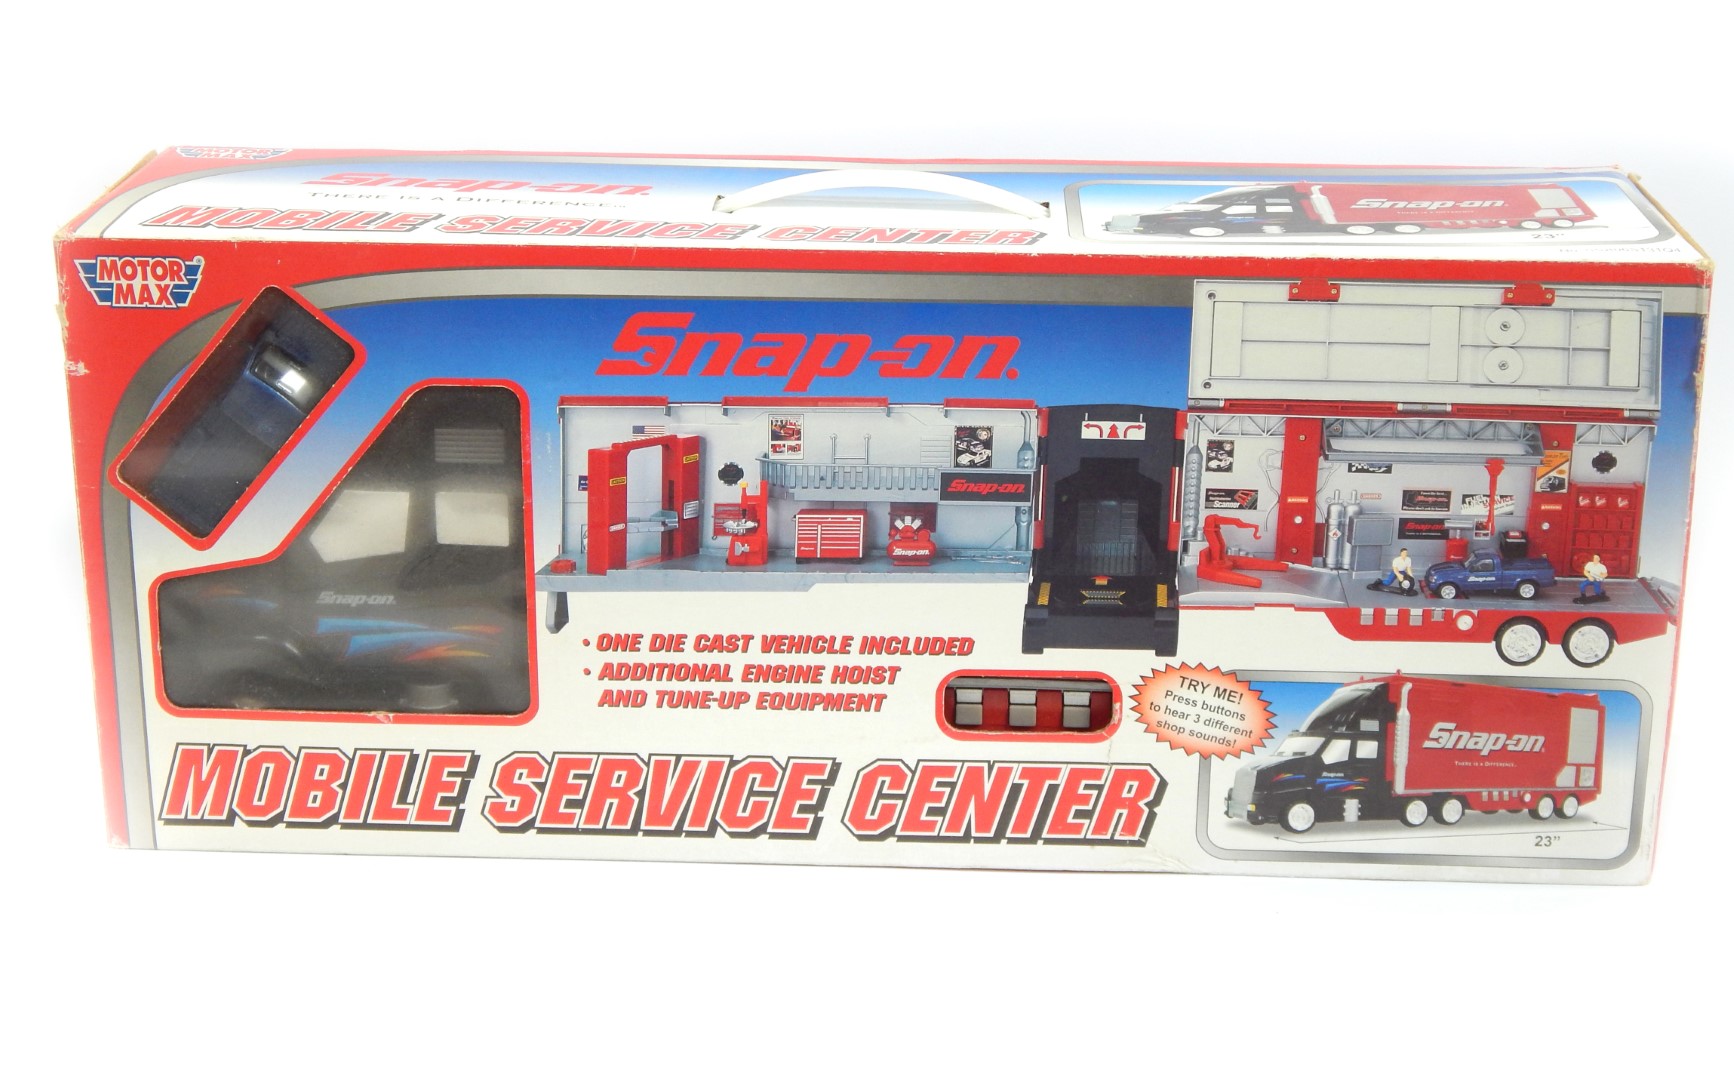 A Motormax Snap-On Mobile Service Centre truck, boxed.